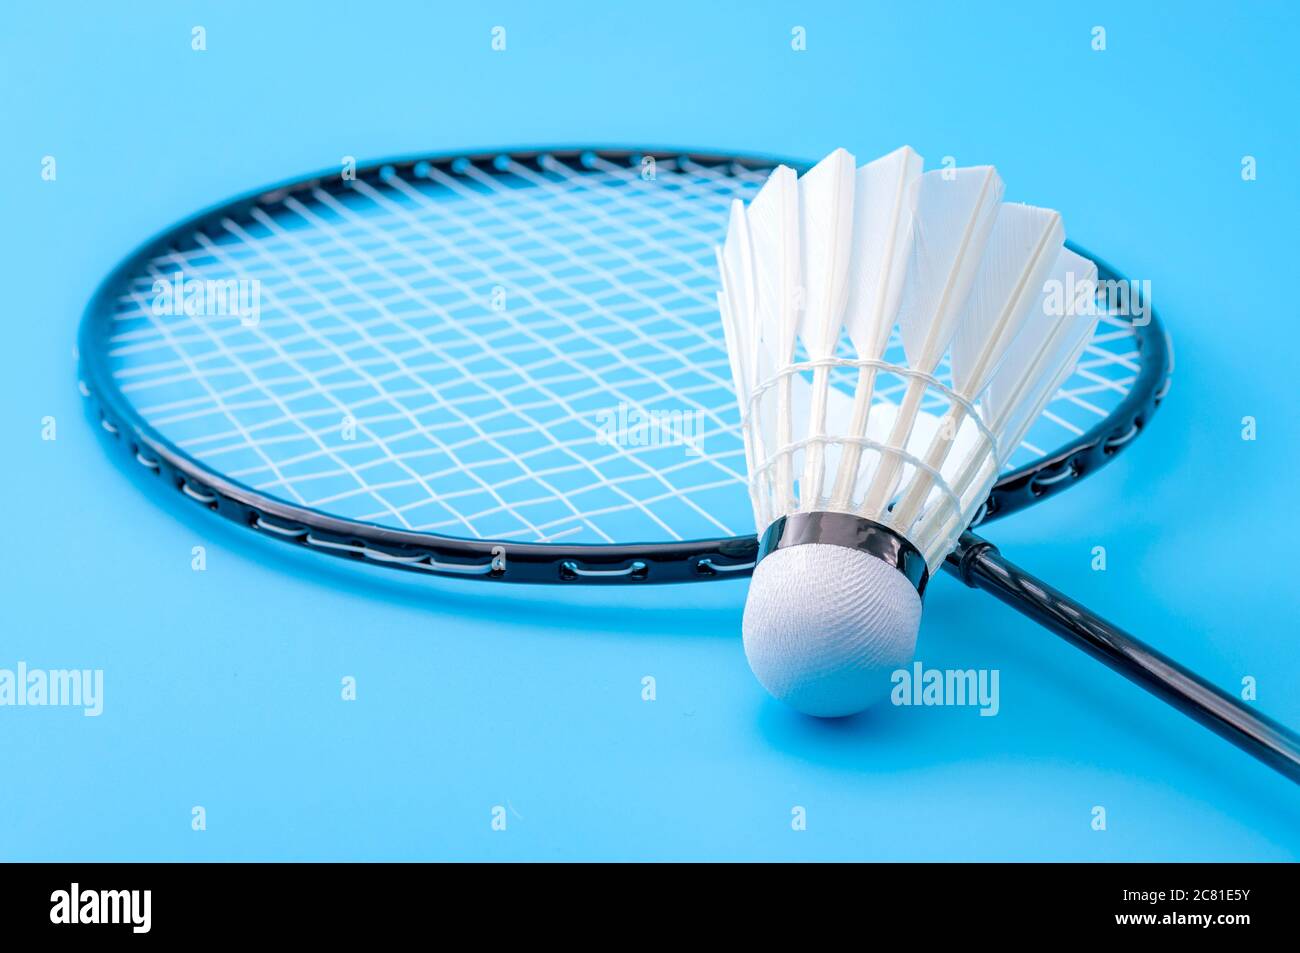 Competitive sports and high performance in tournament match conceptual idea  with badminton rackets and shuttlecock (birdie) isolated on blue court bac  Stock Photo - Alamy